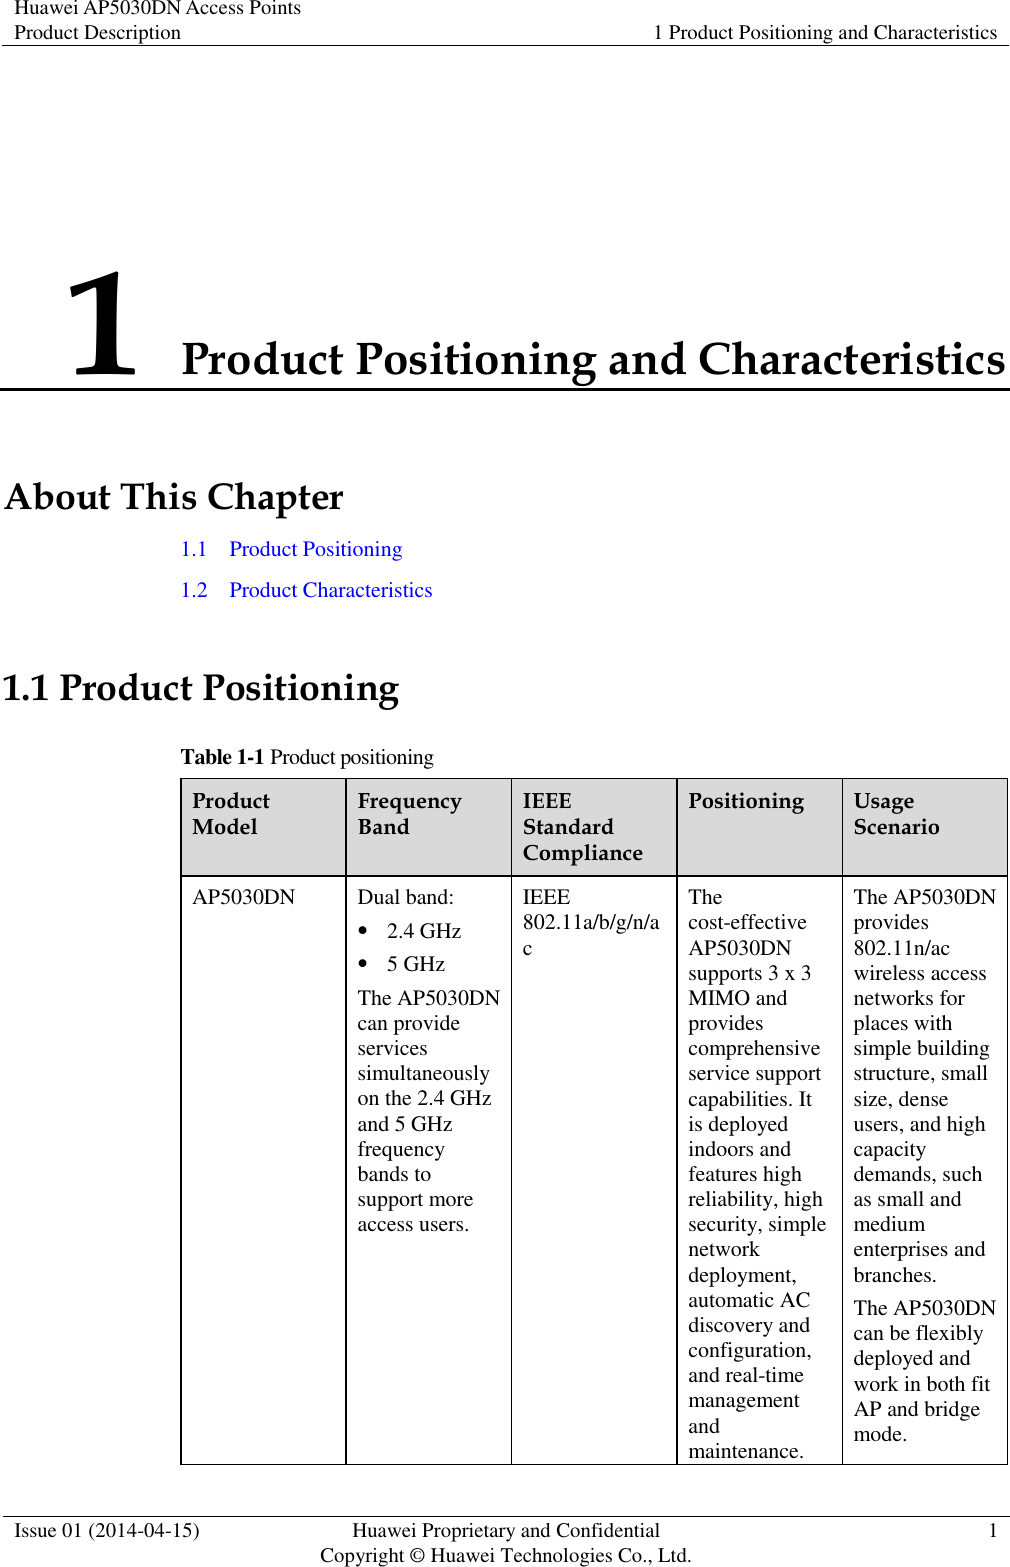 Huawei AP5030DN Access Points Product Description 1 Product Positioning and Characteristics  Issue 01 (2014-04-15) Huawei Proprietary and Confidential                                     Copyright © Huawei Technologies Co., Ltd. 1  1 Product Positioning and Characteristics About This Chapter 1.1    Product Positioning 1.2    Product Characteristics 1.1 Product Positioning Table 1-1 Product positioning Product Model Frequency Band IEEE Standard Compliance Positioning Usage Scenario AP5030DN Dual band:  2.4 GHz  5 GHz The AP5030DN can provide services simultaneously on the 2.4 GHz and 5 GHz frequency bands to support more access users. IEEE 802.11a/b/g/n/ac The cost-effective AP5030DN supports 3 x 3 MIMO and provides comprehensive service support capabilities. It is deployed indoors and features high reliability, high security, simple network deployment, automatic AC discovery and configuration, and real-time management and maintenance. The AP5030DN provides 802.11n/ac wireless access networks for places with simple building structure, small size, dense users, and high capacity demands, such as small and medium enterprises and branches. The AP5030DN can be flexibly deployed and work in both fit AP and bridge mode. 